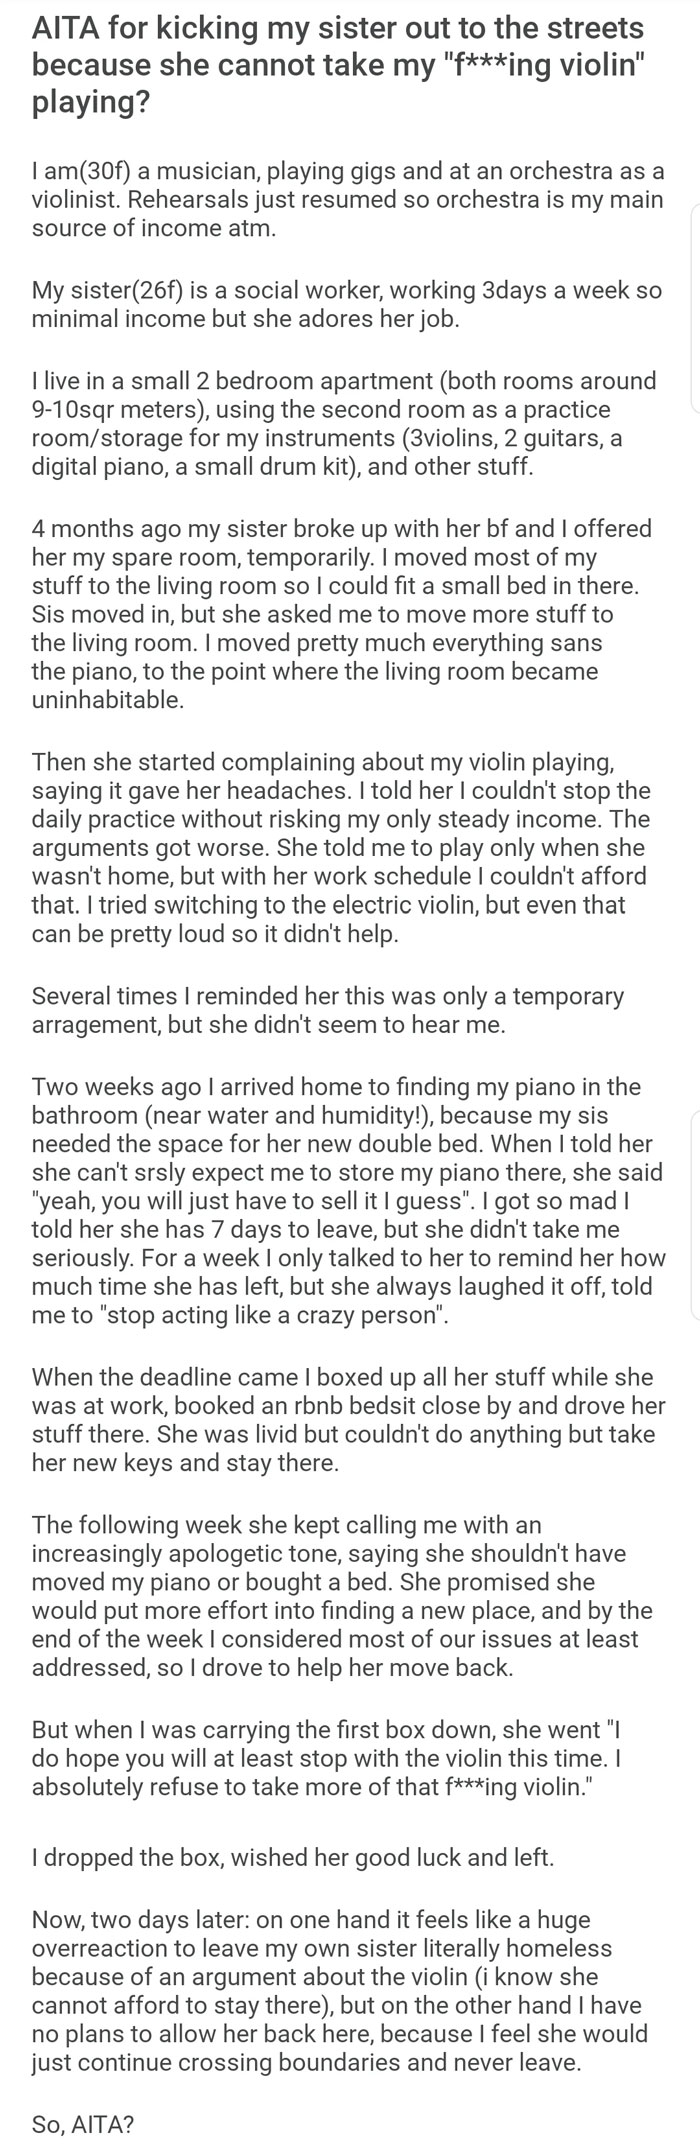 Sister Wants To Squat In Op's Spare Room But Demands That She Stop Practicing Violin That She Plays For Her Job